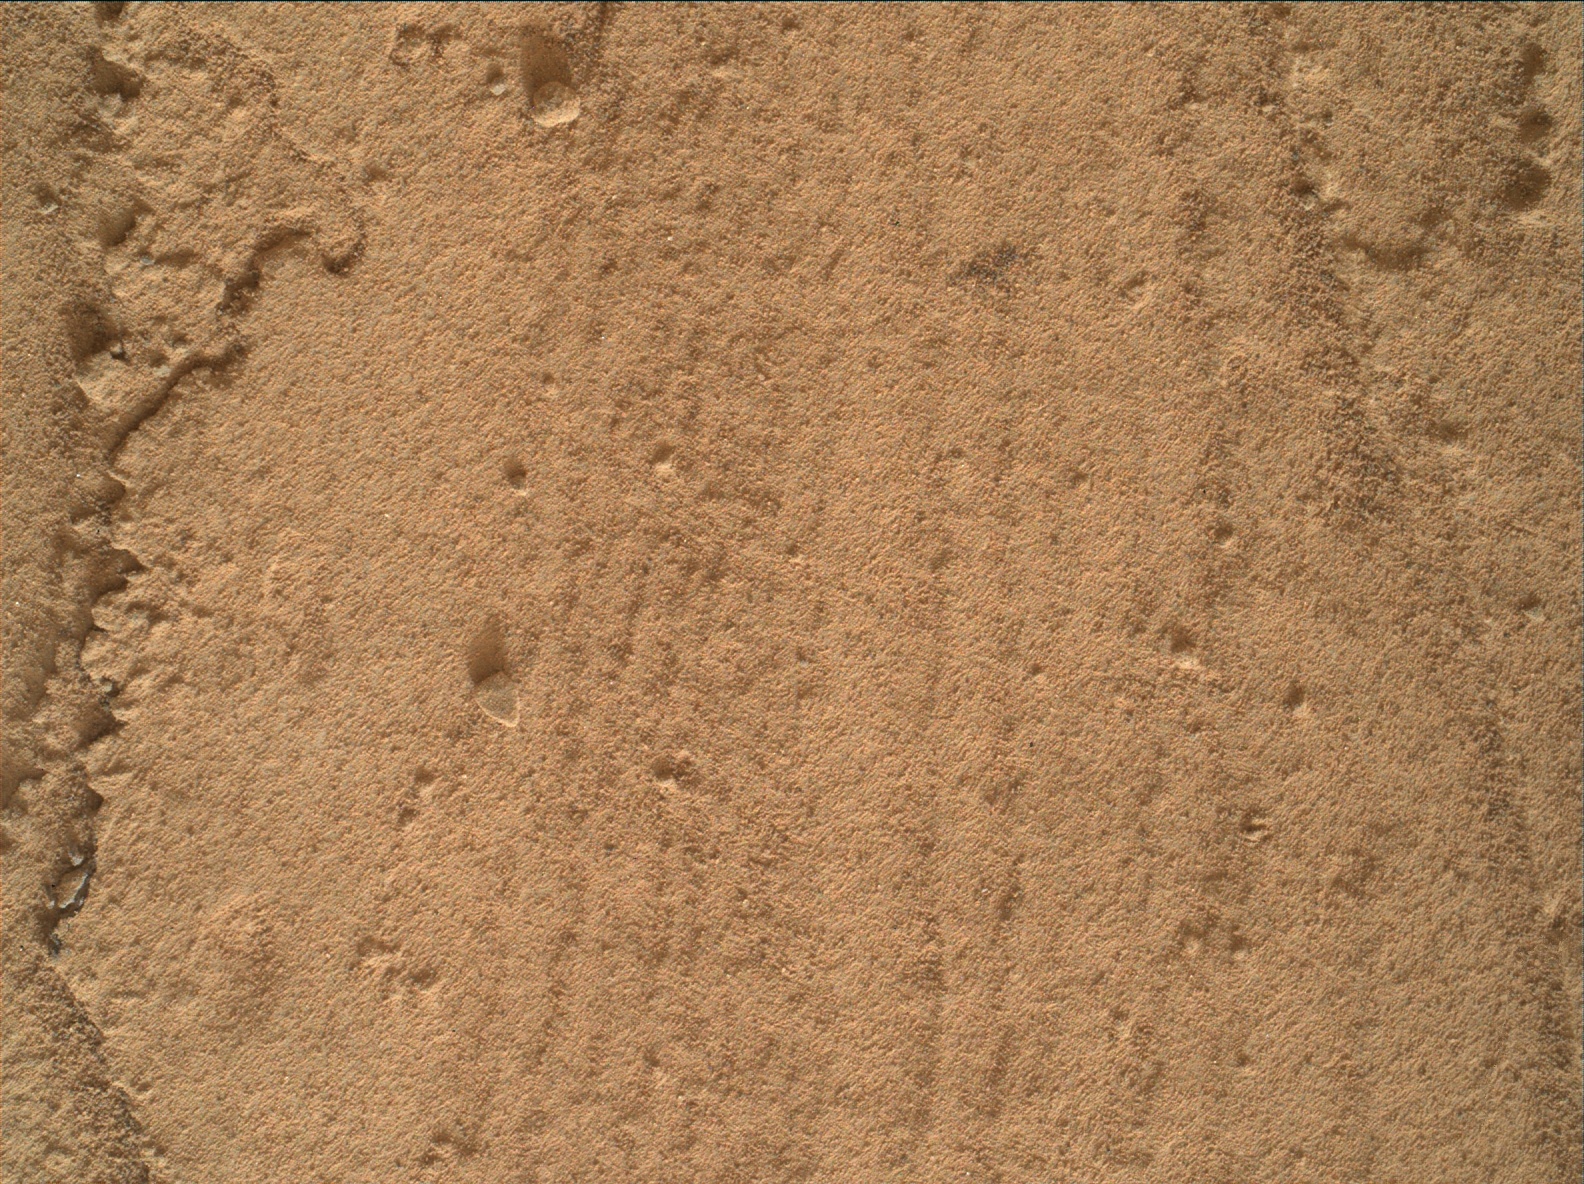 Nasa's Mars rover Curiosity acquired this image using its Mars Hand Lens Imager (MAHLI) on Sol 805